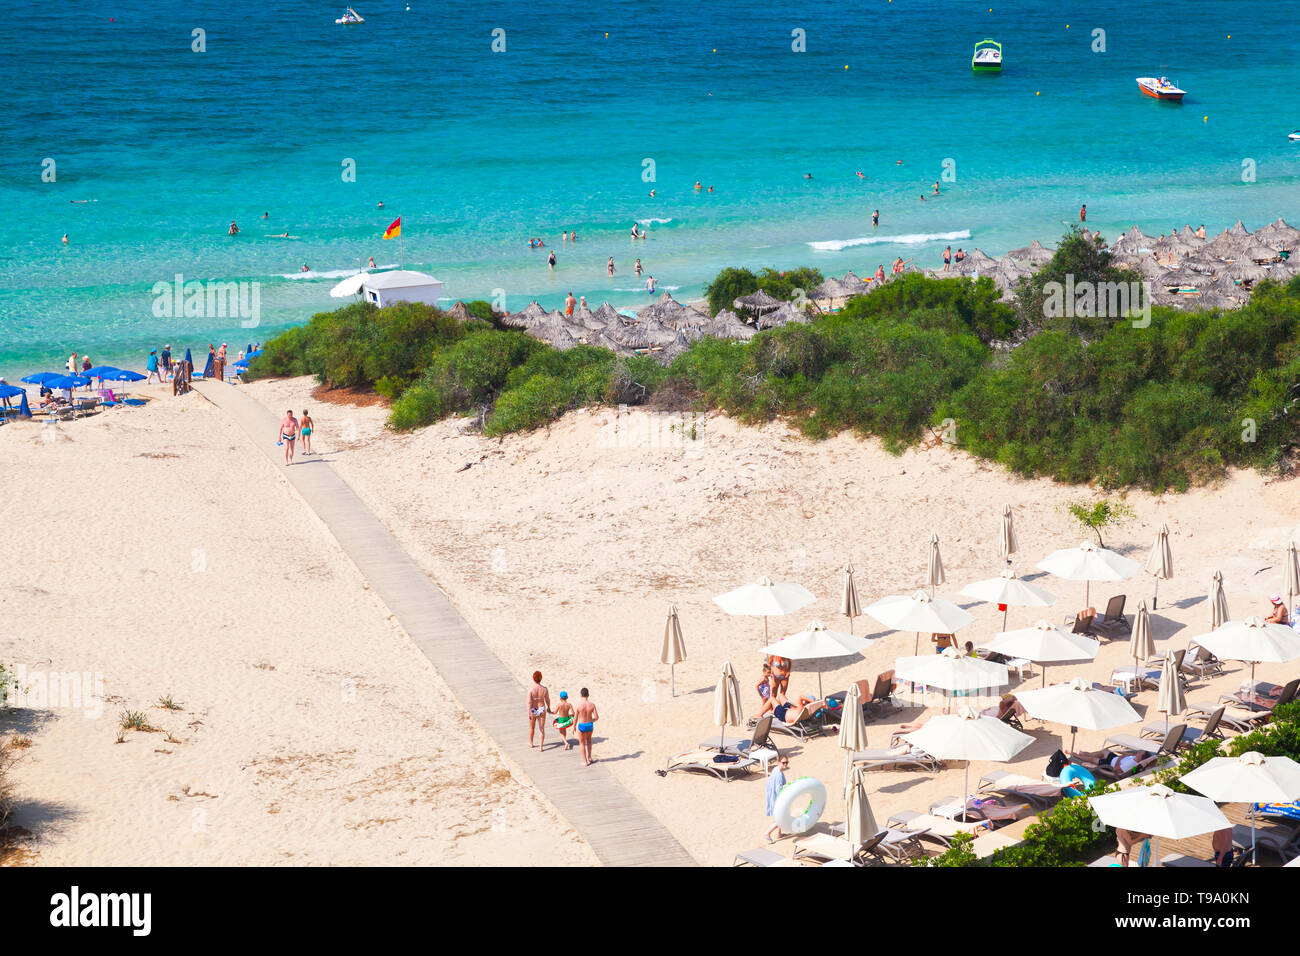 Ayia Napa, Cyprus - June 13, 2018: Public beach of Ayia Napa resort town at the far eastern end of the southern coast of Cyprus island. Ordinary peopl Stock Photo